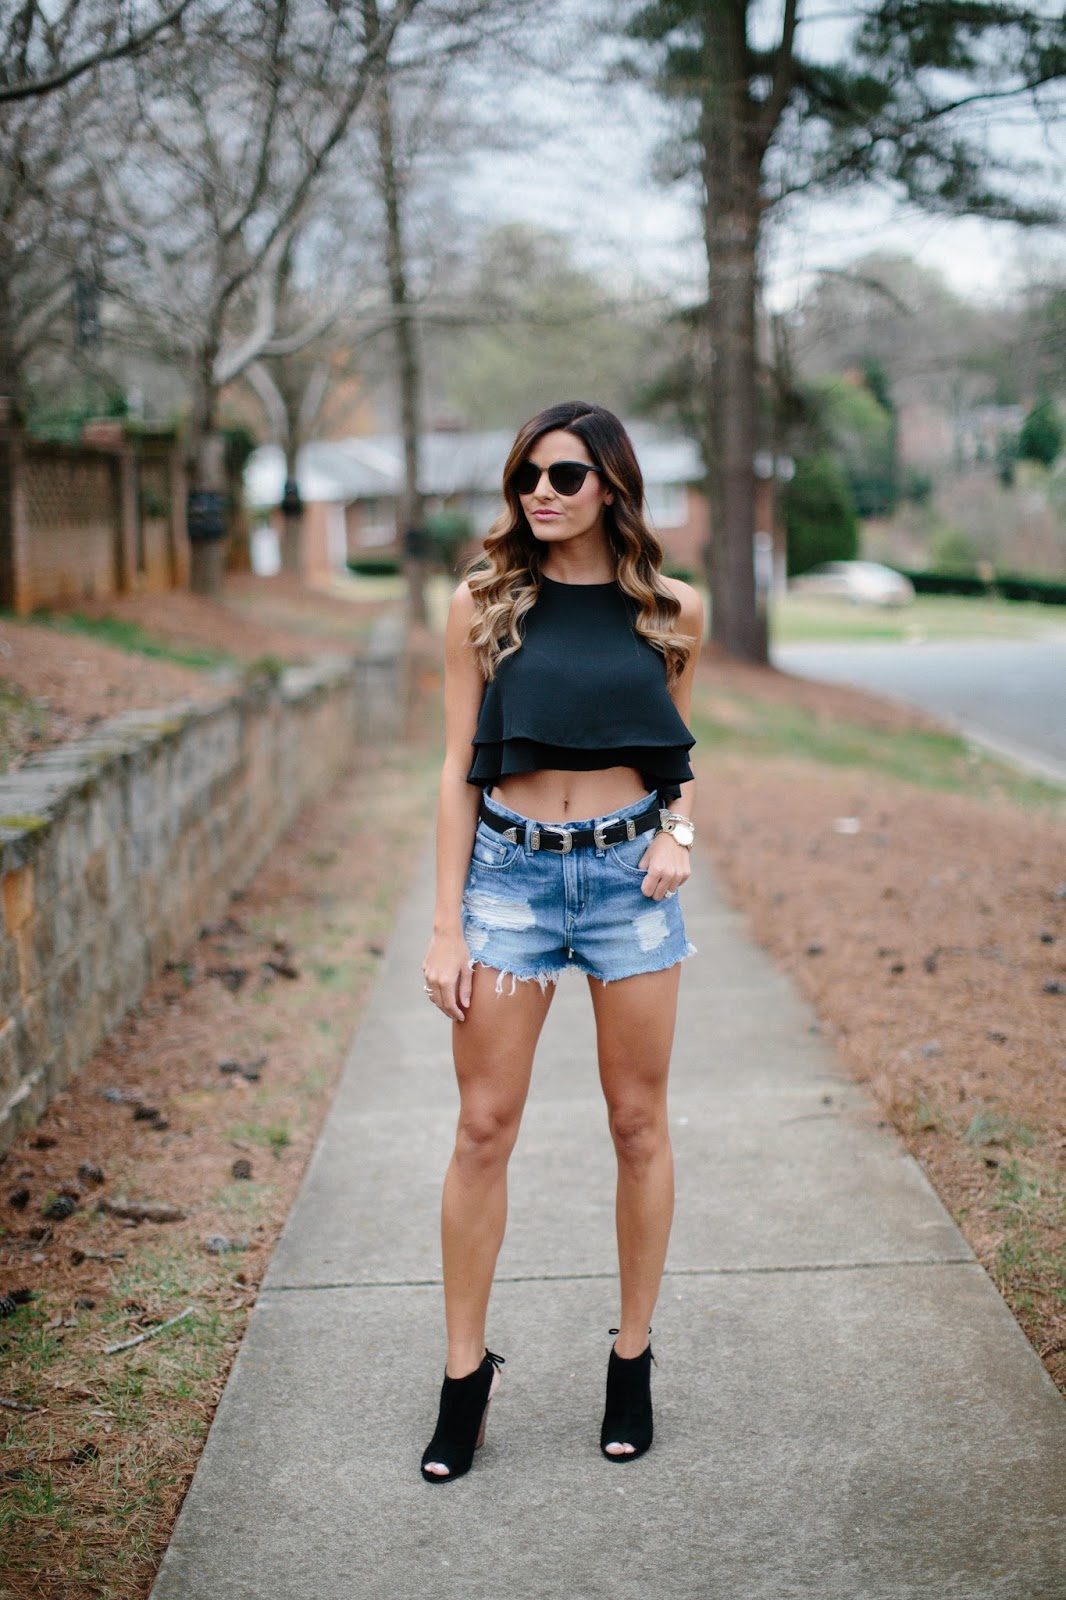 woman standing on sidewalk wearing denim shorts and black ankle boots